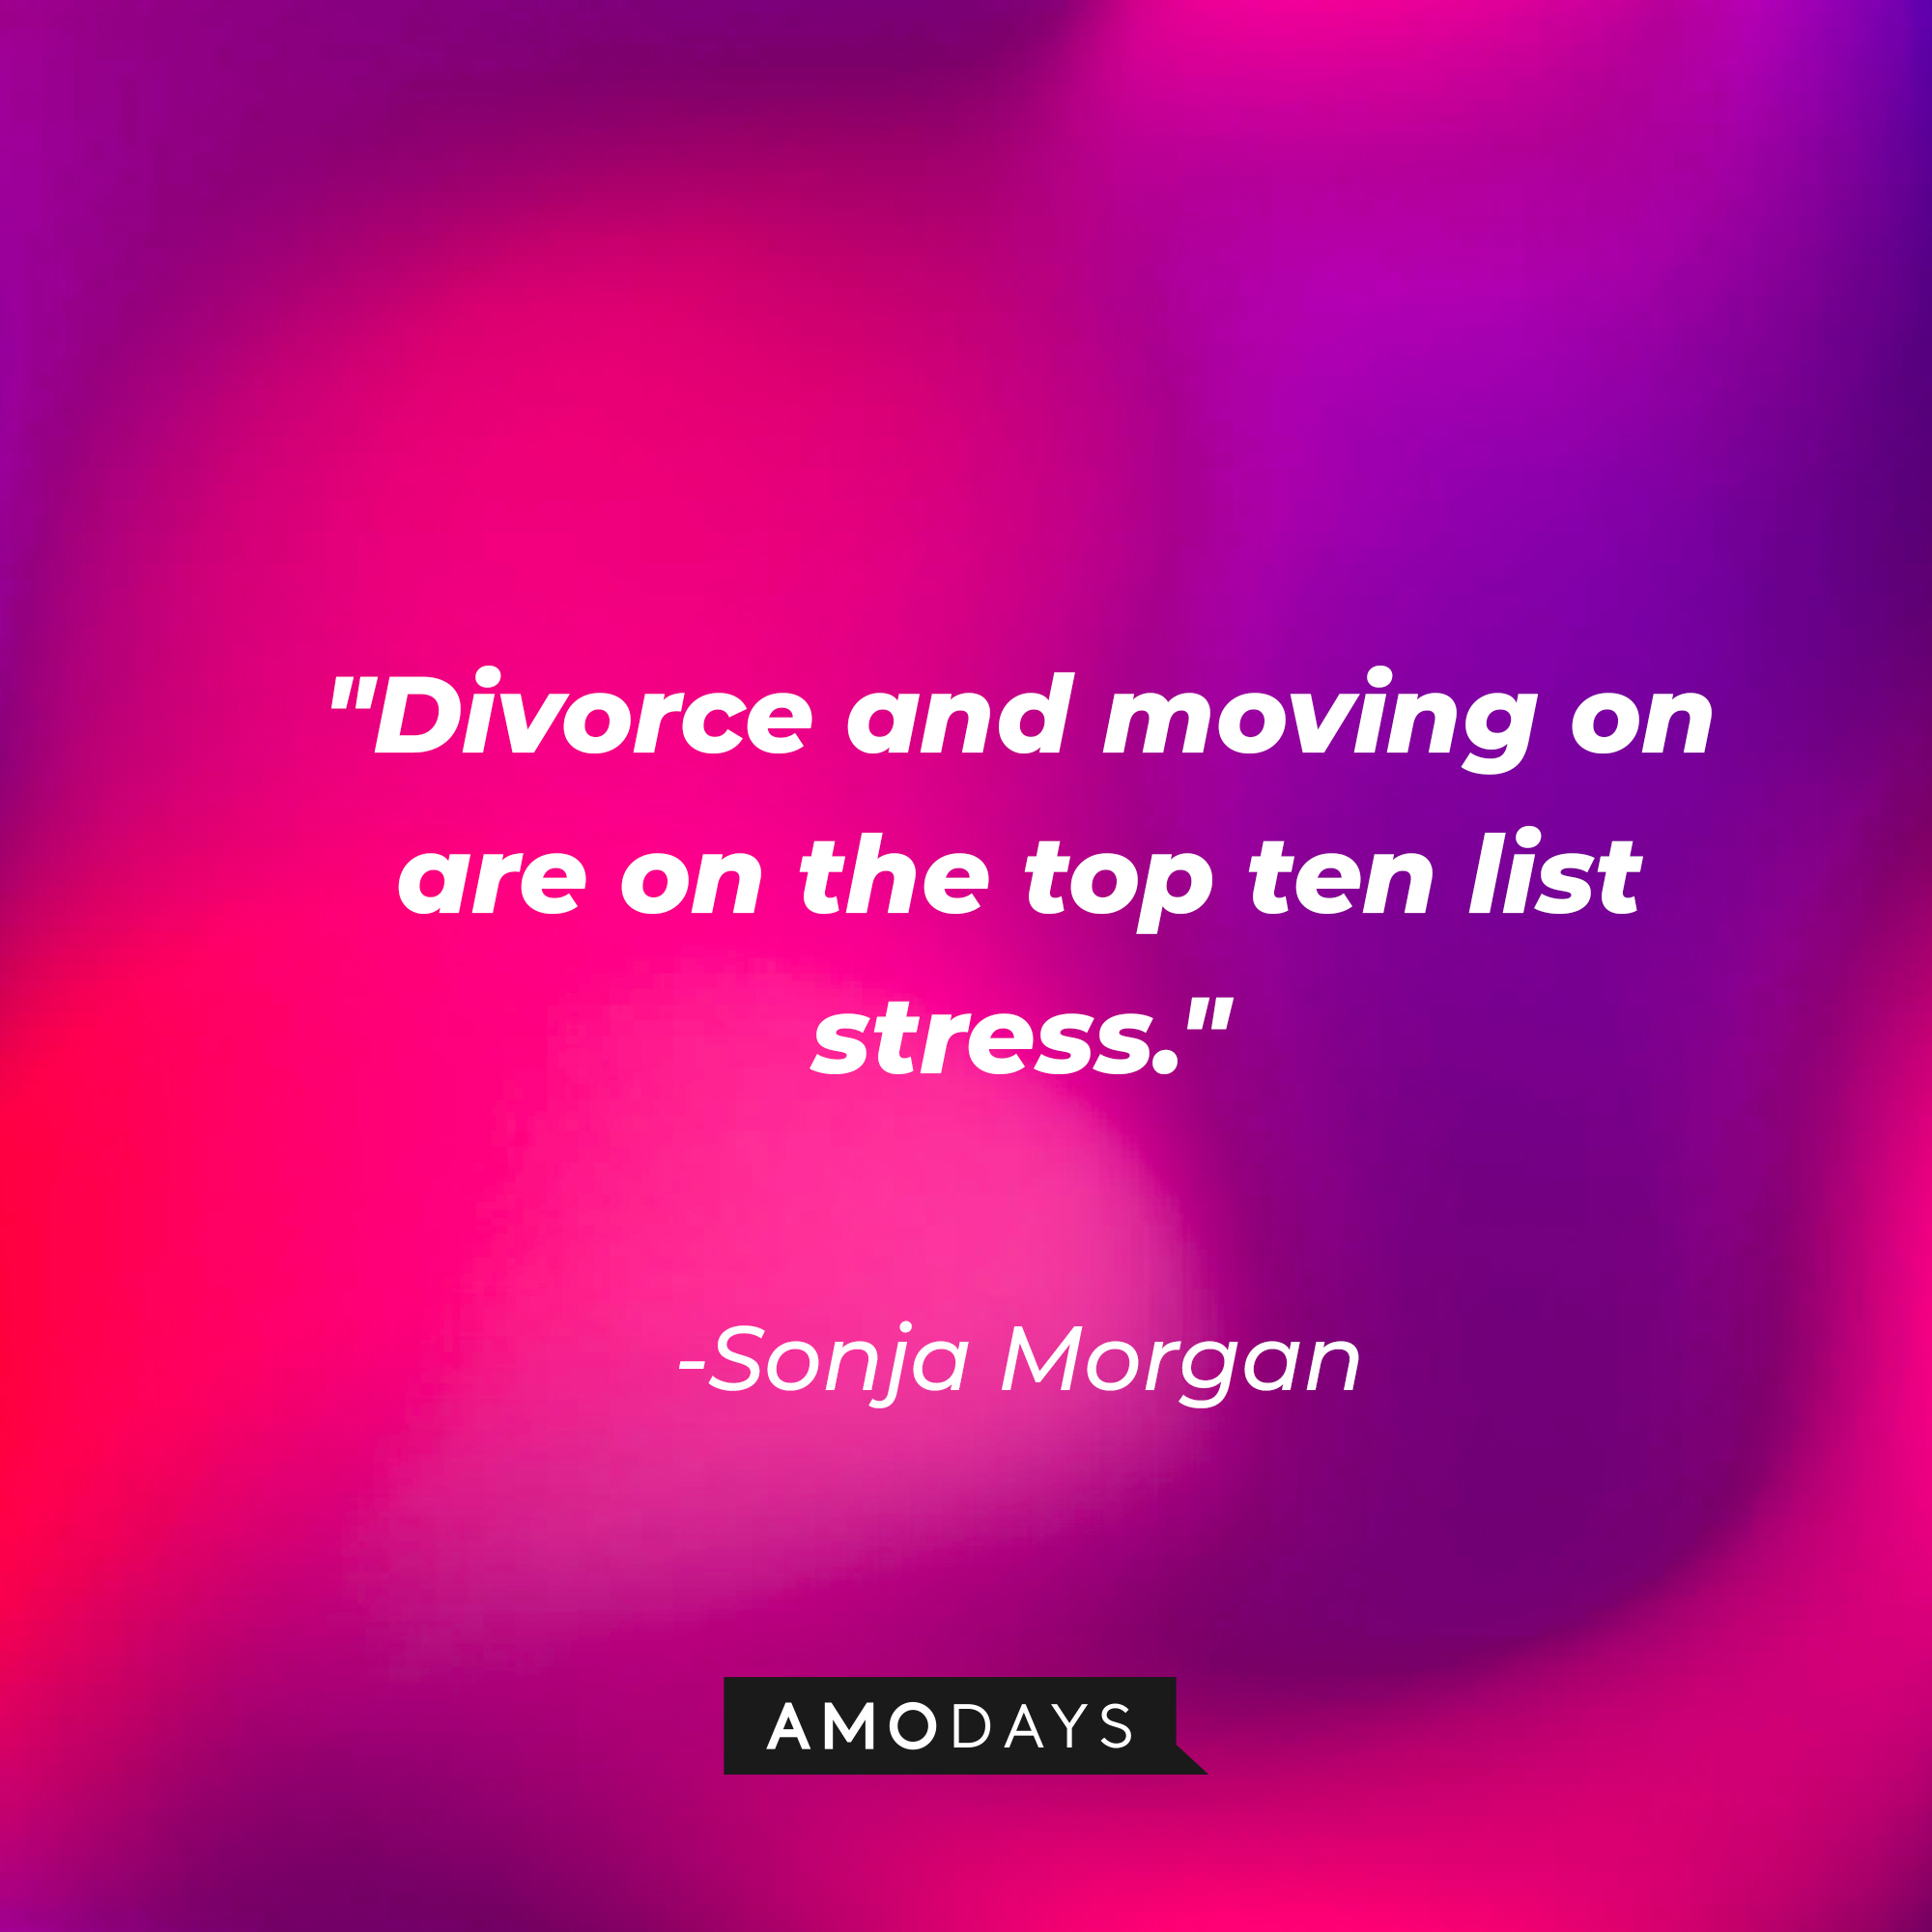 Sonja Morgan's quote: " Divorce and moving on are on the top ten list stress." Sonja Morgan's quote: "I don't stir the pot. I stir the drink." | Source: Amodays